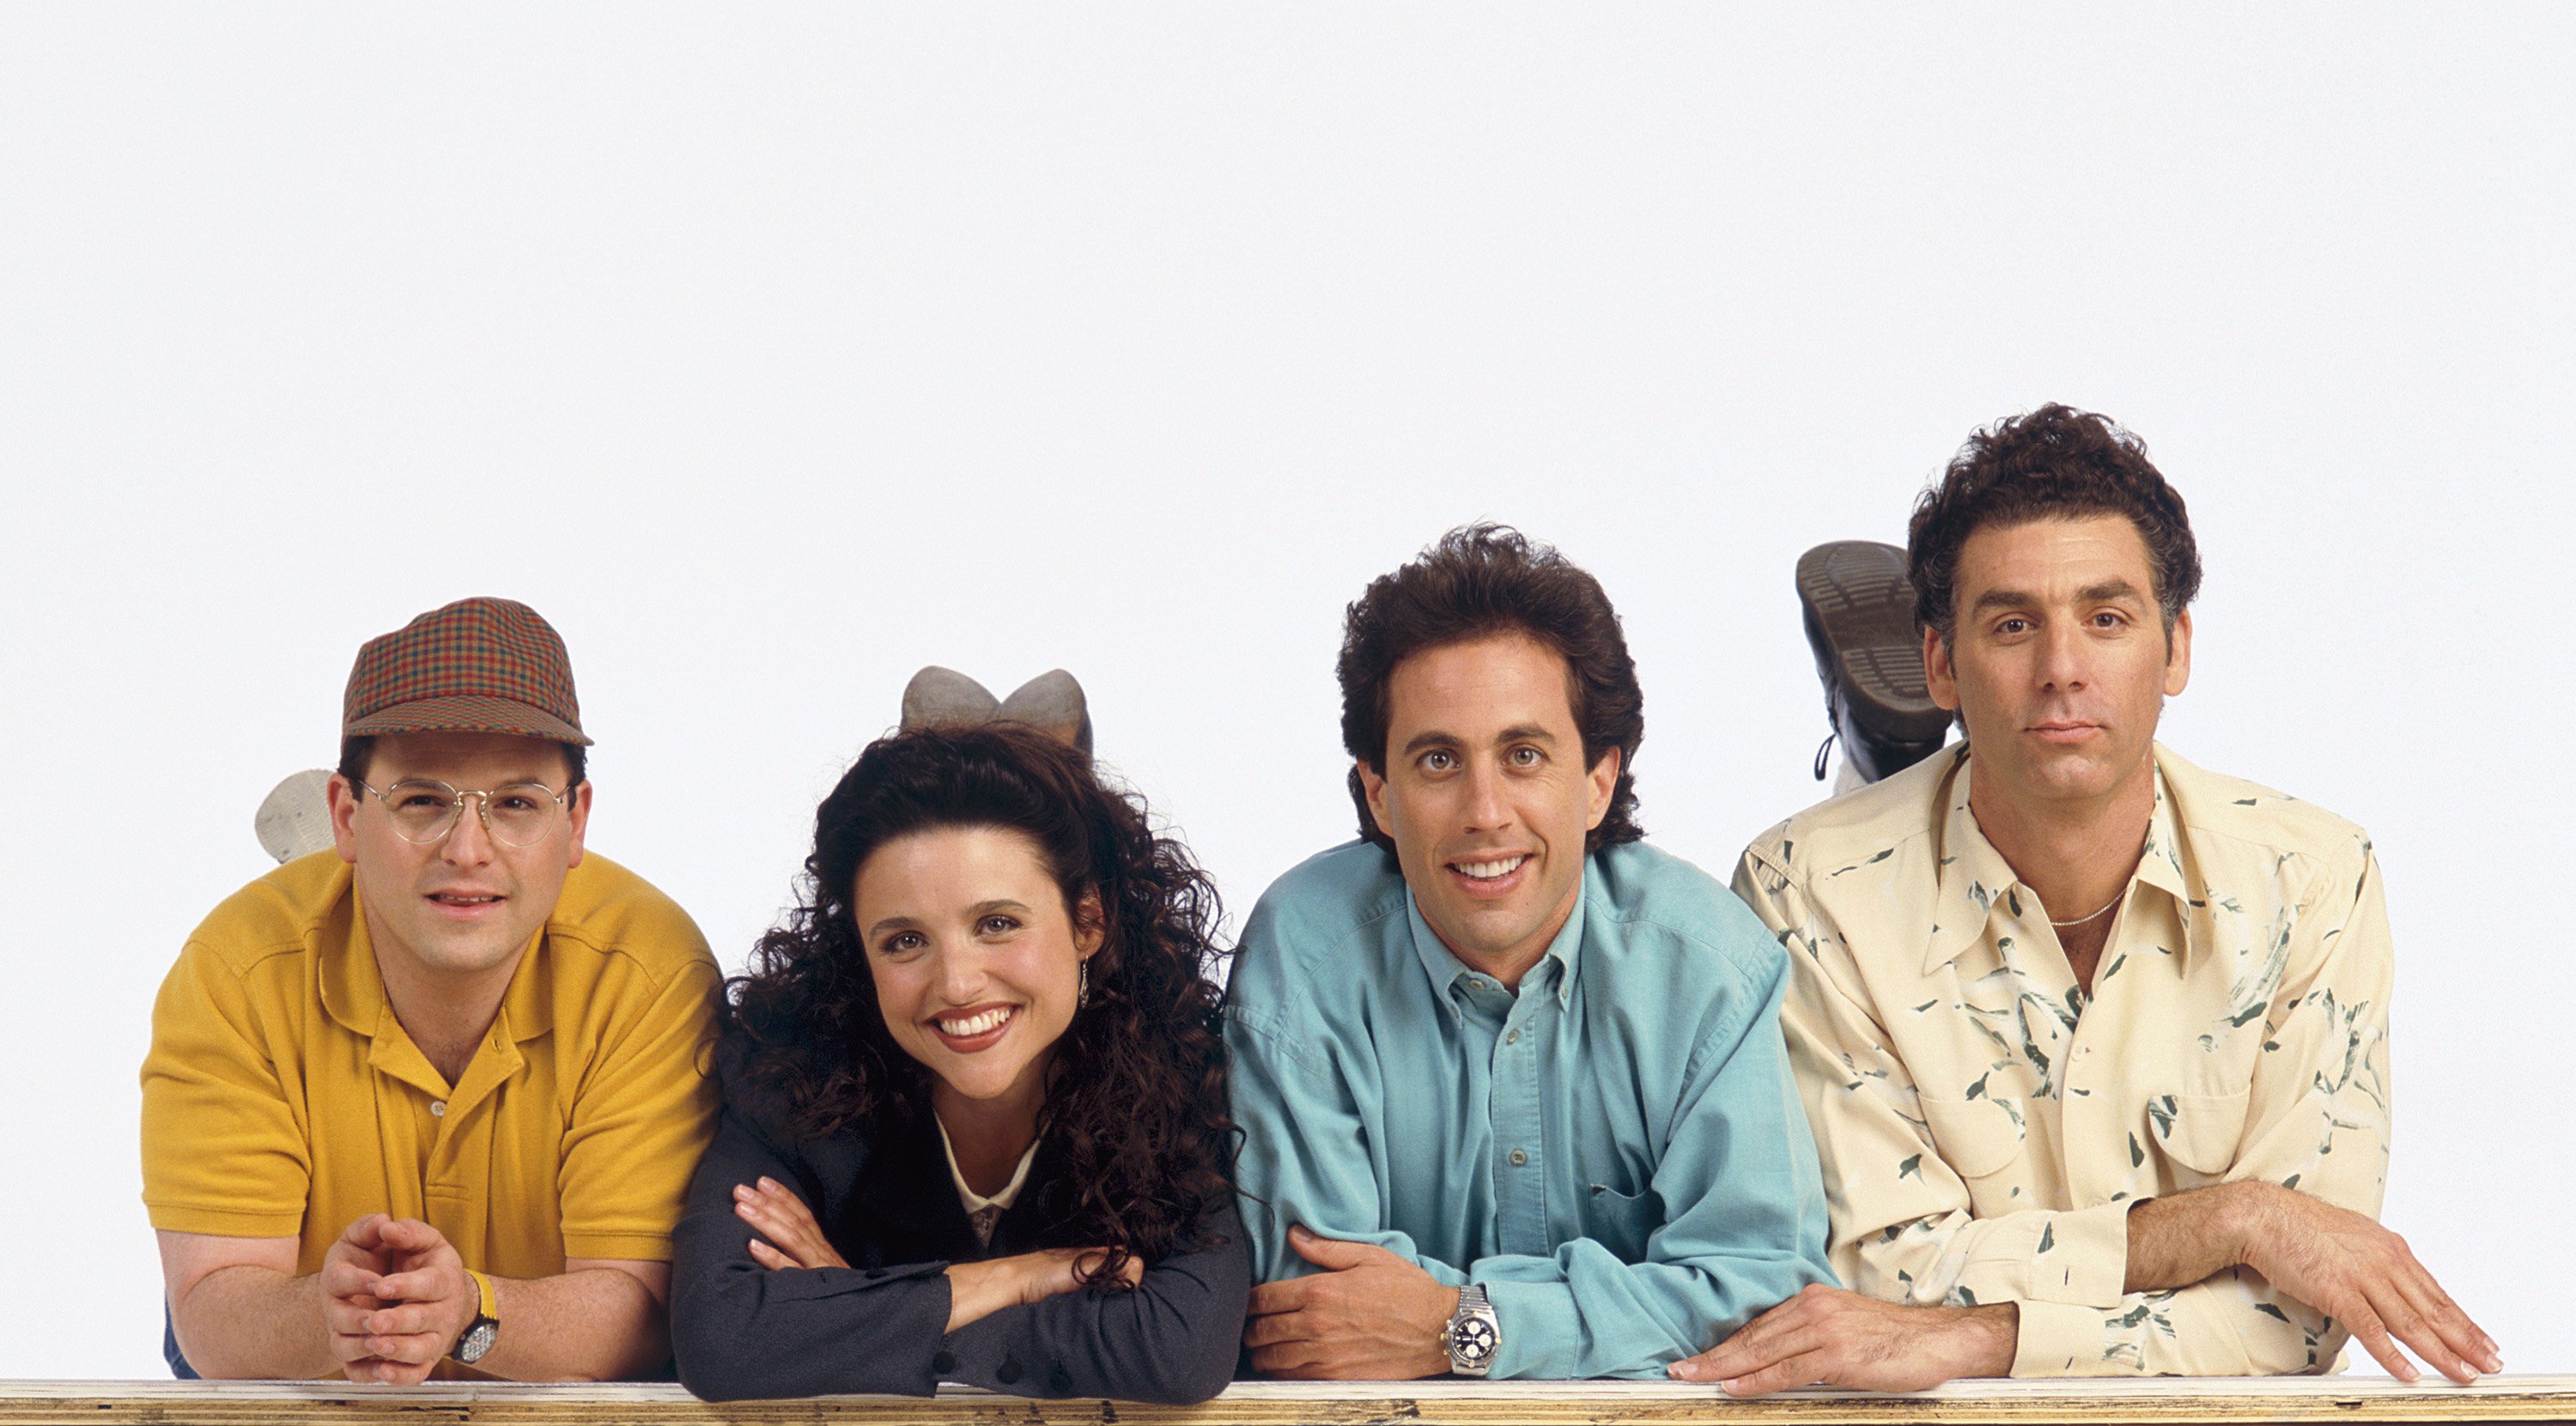 the cast of 'Seinfeld' 